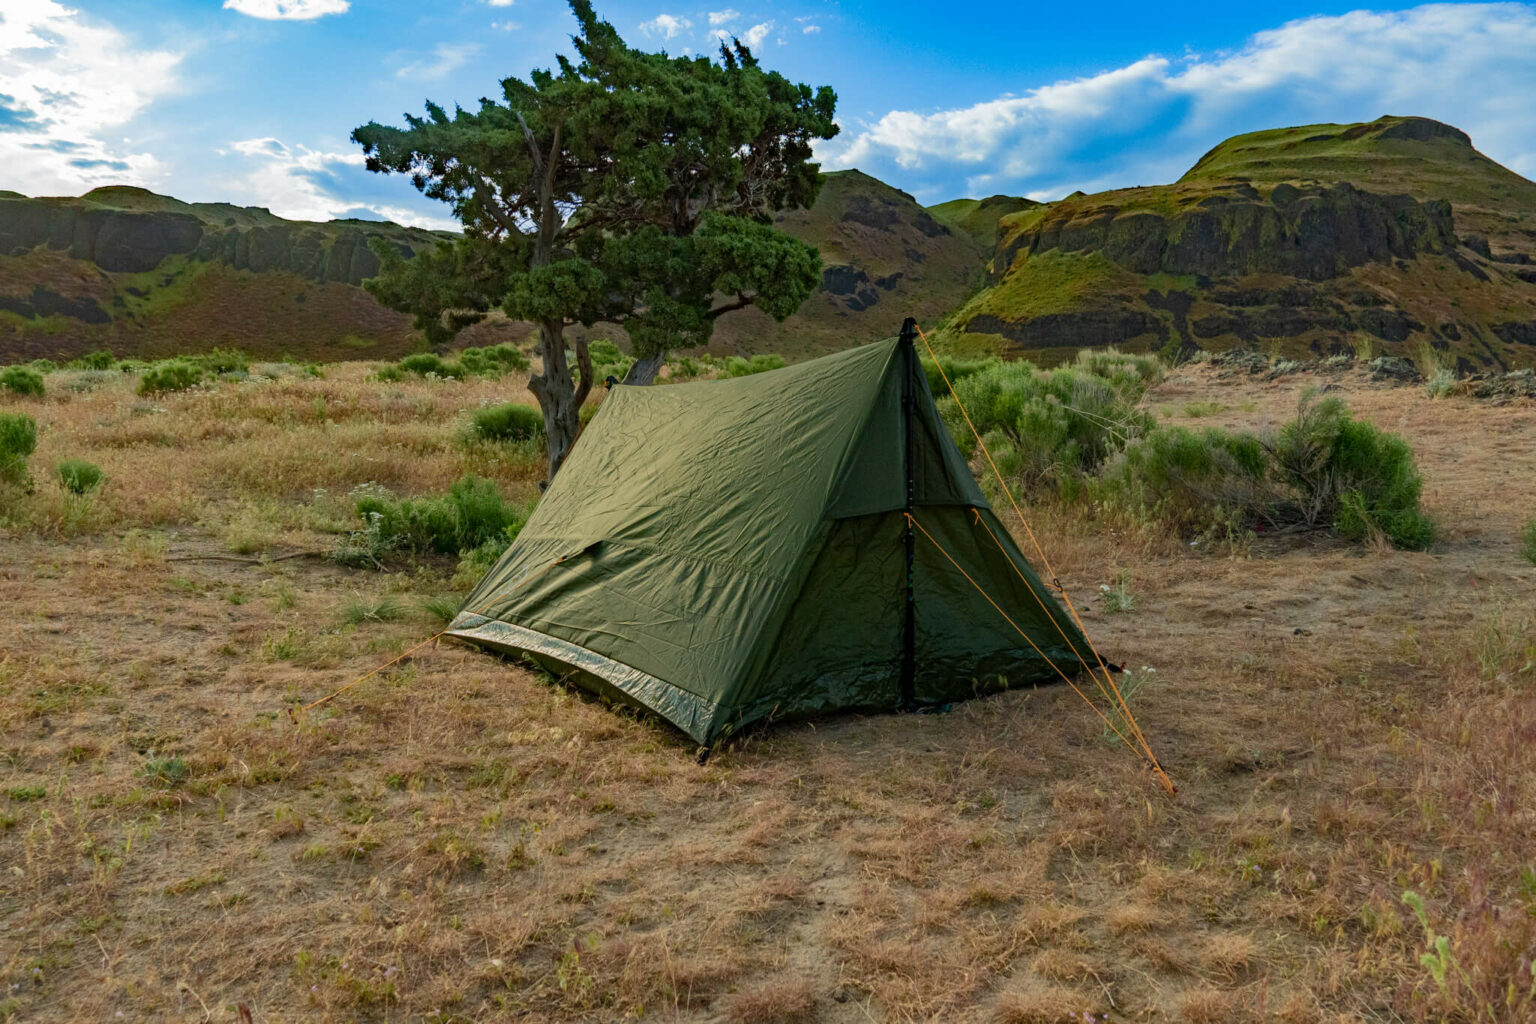 Trekker Tent 2, Backpacking and Camping 2-Person Trekking Pole Tent ...